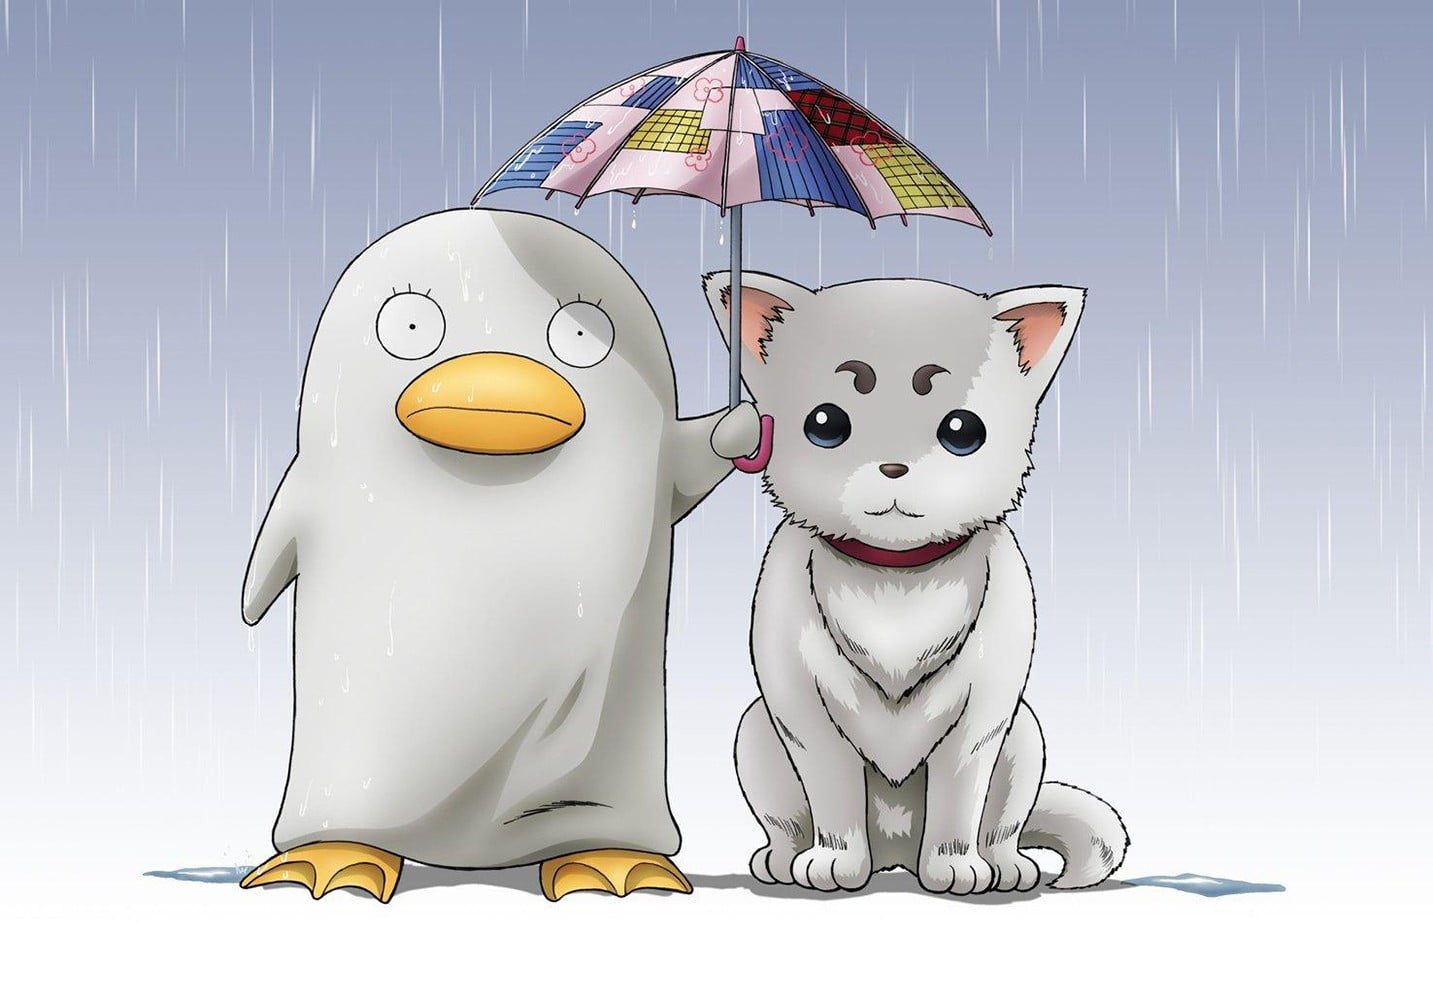 Gintama pet dog and duck digital wallpaper, anime, simple background